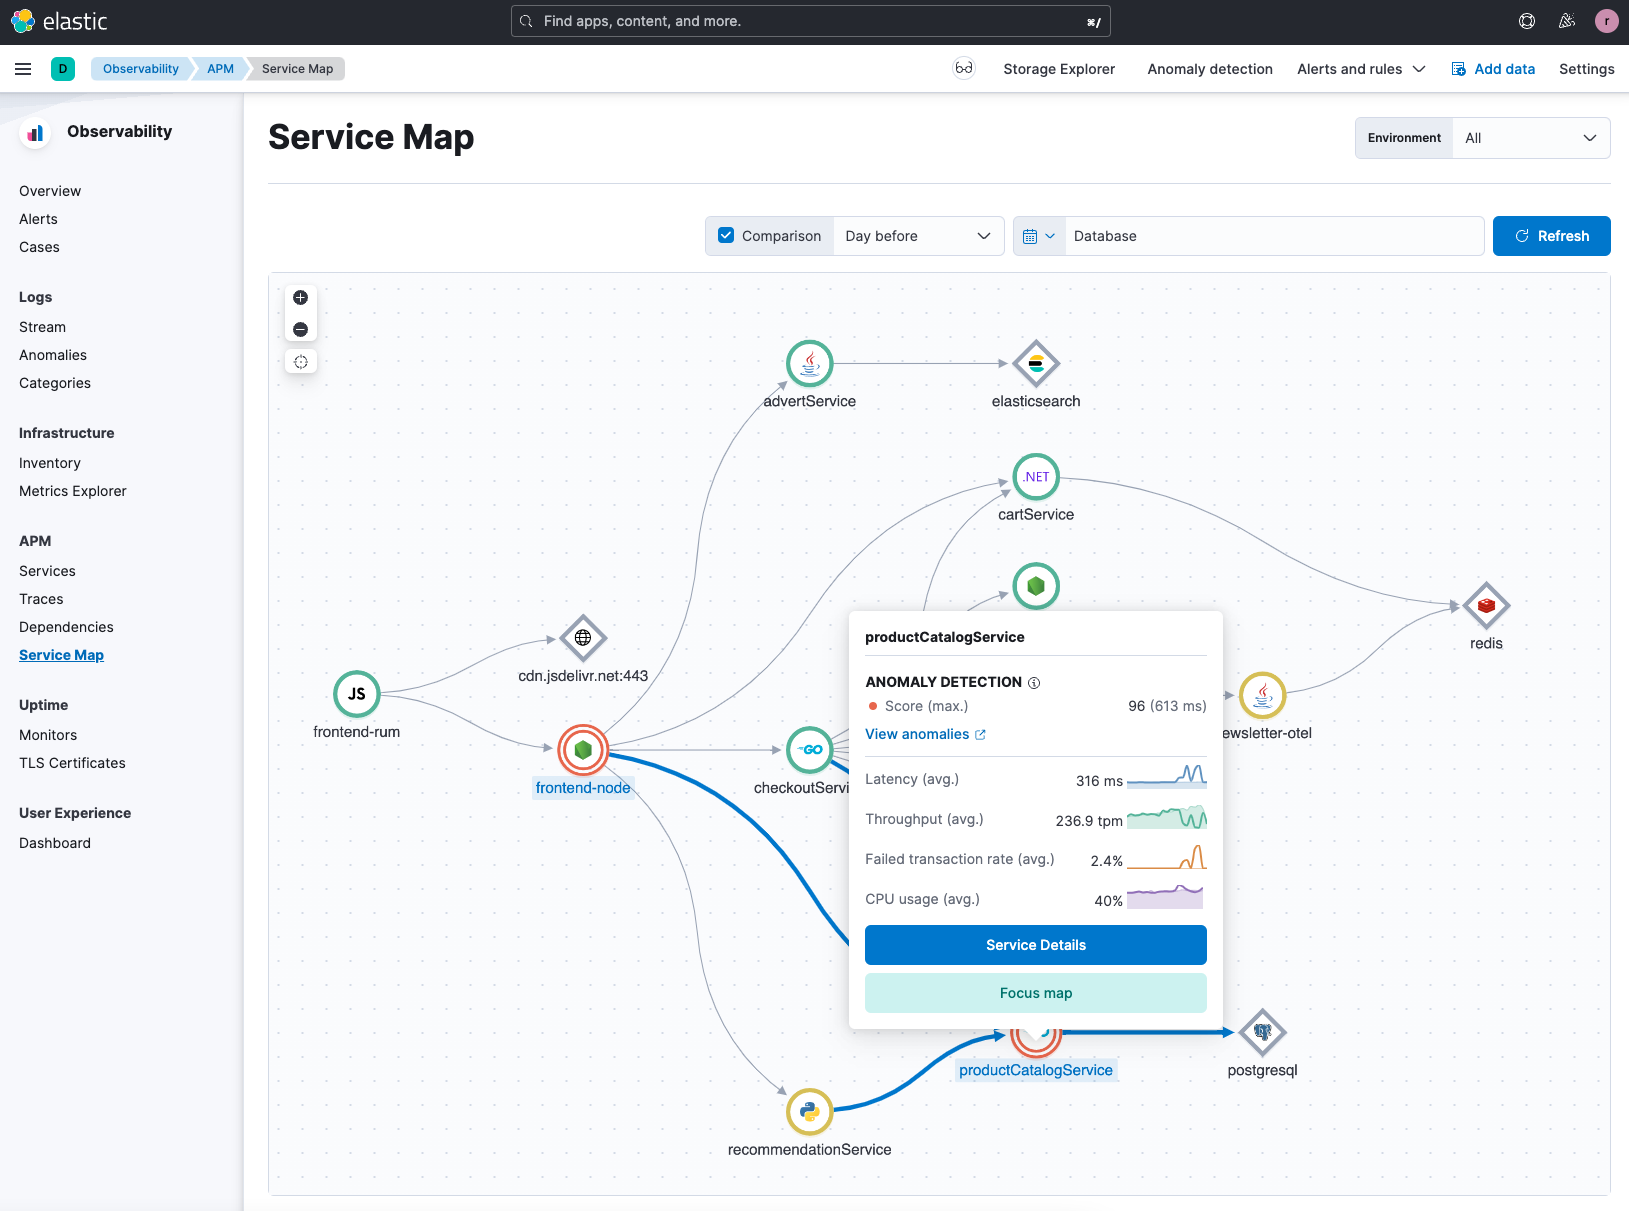 observability service map service details